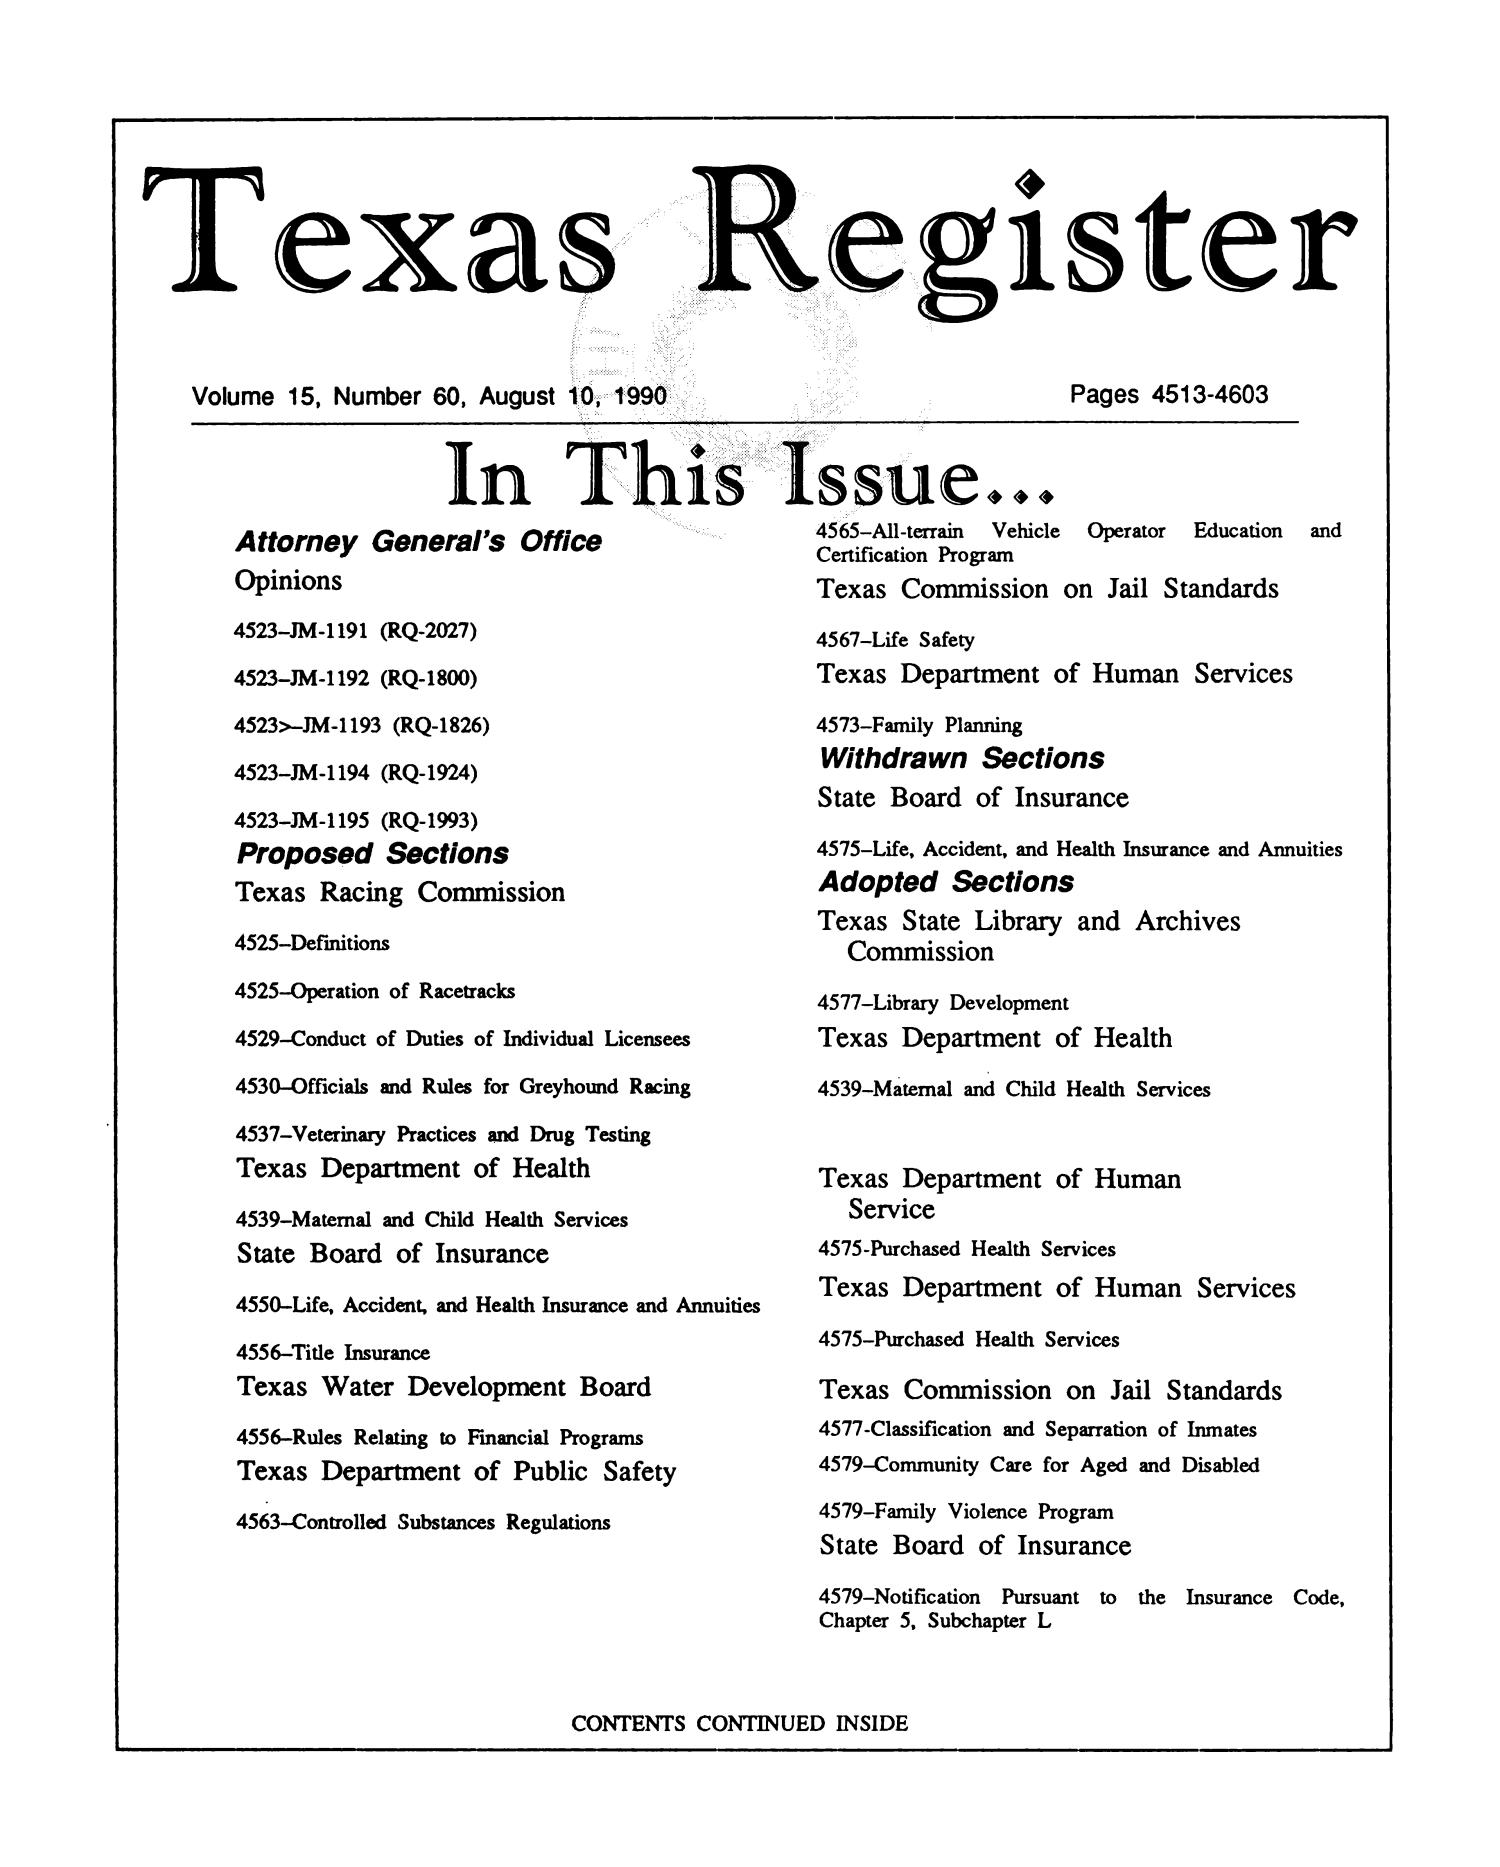 Texas Register, Volume 15, Number 60, Pages 4513-4603, August 10, 1990
                                                
                                                    Title Page
                                                